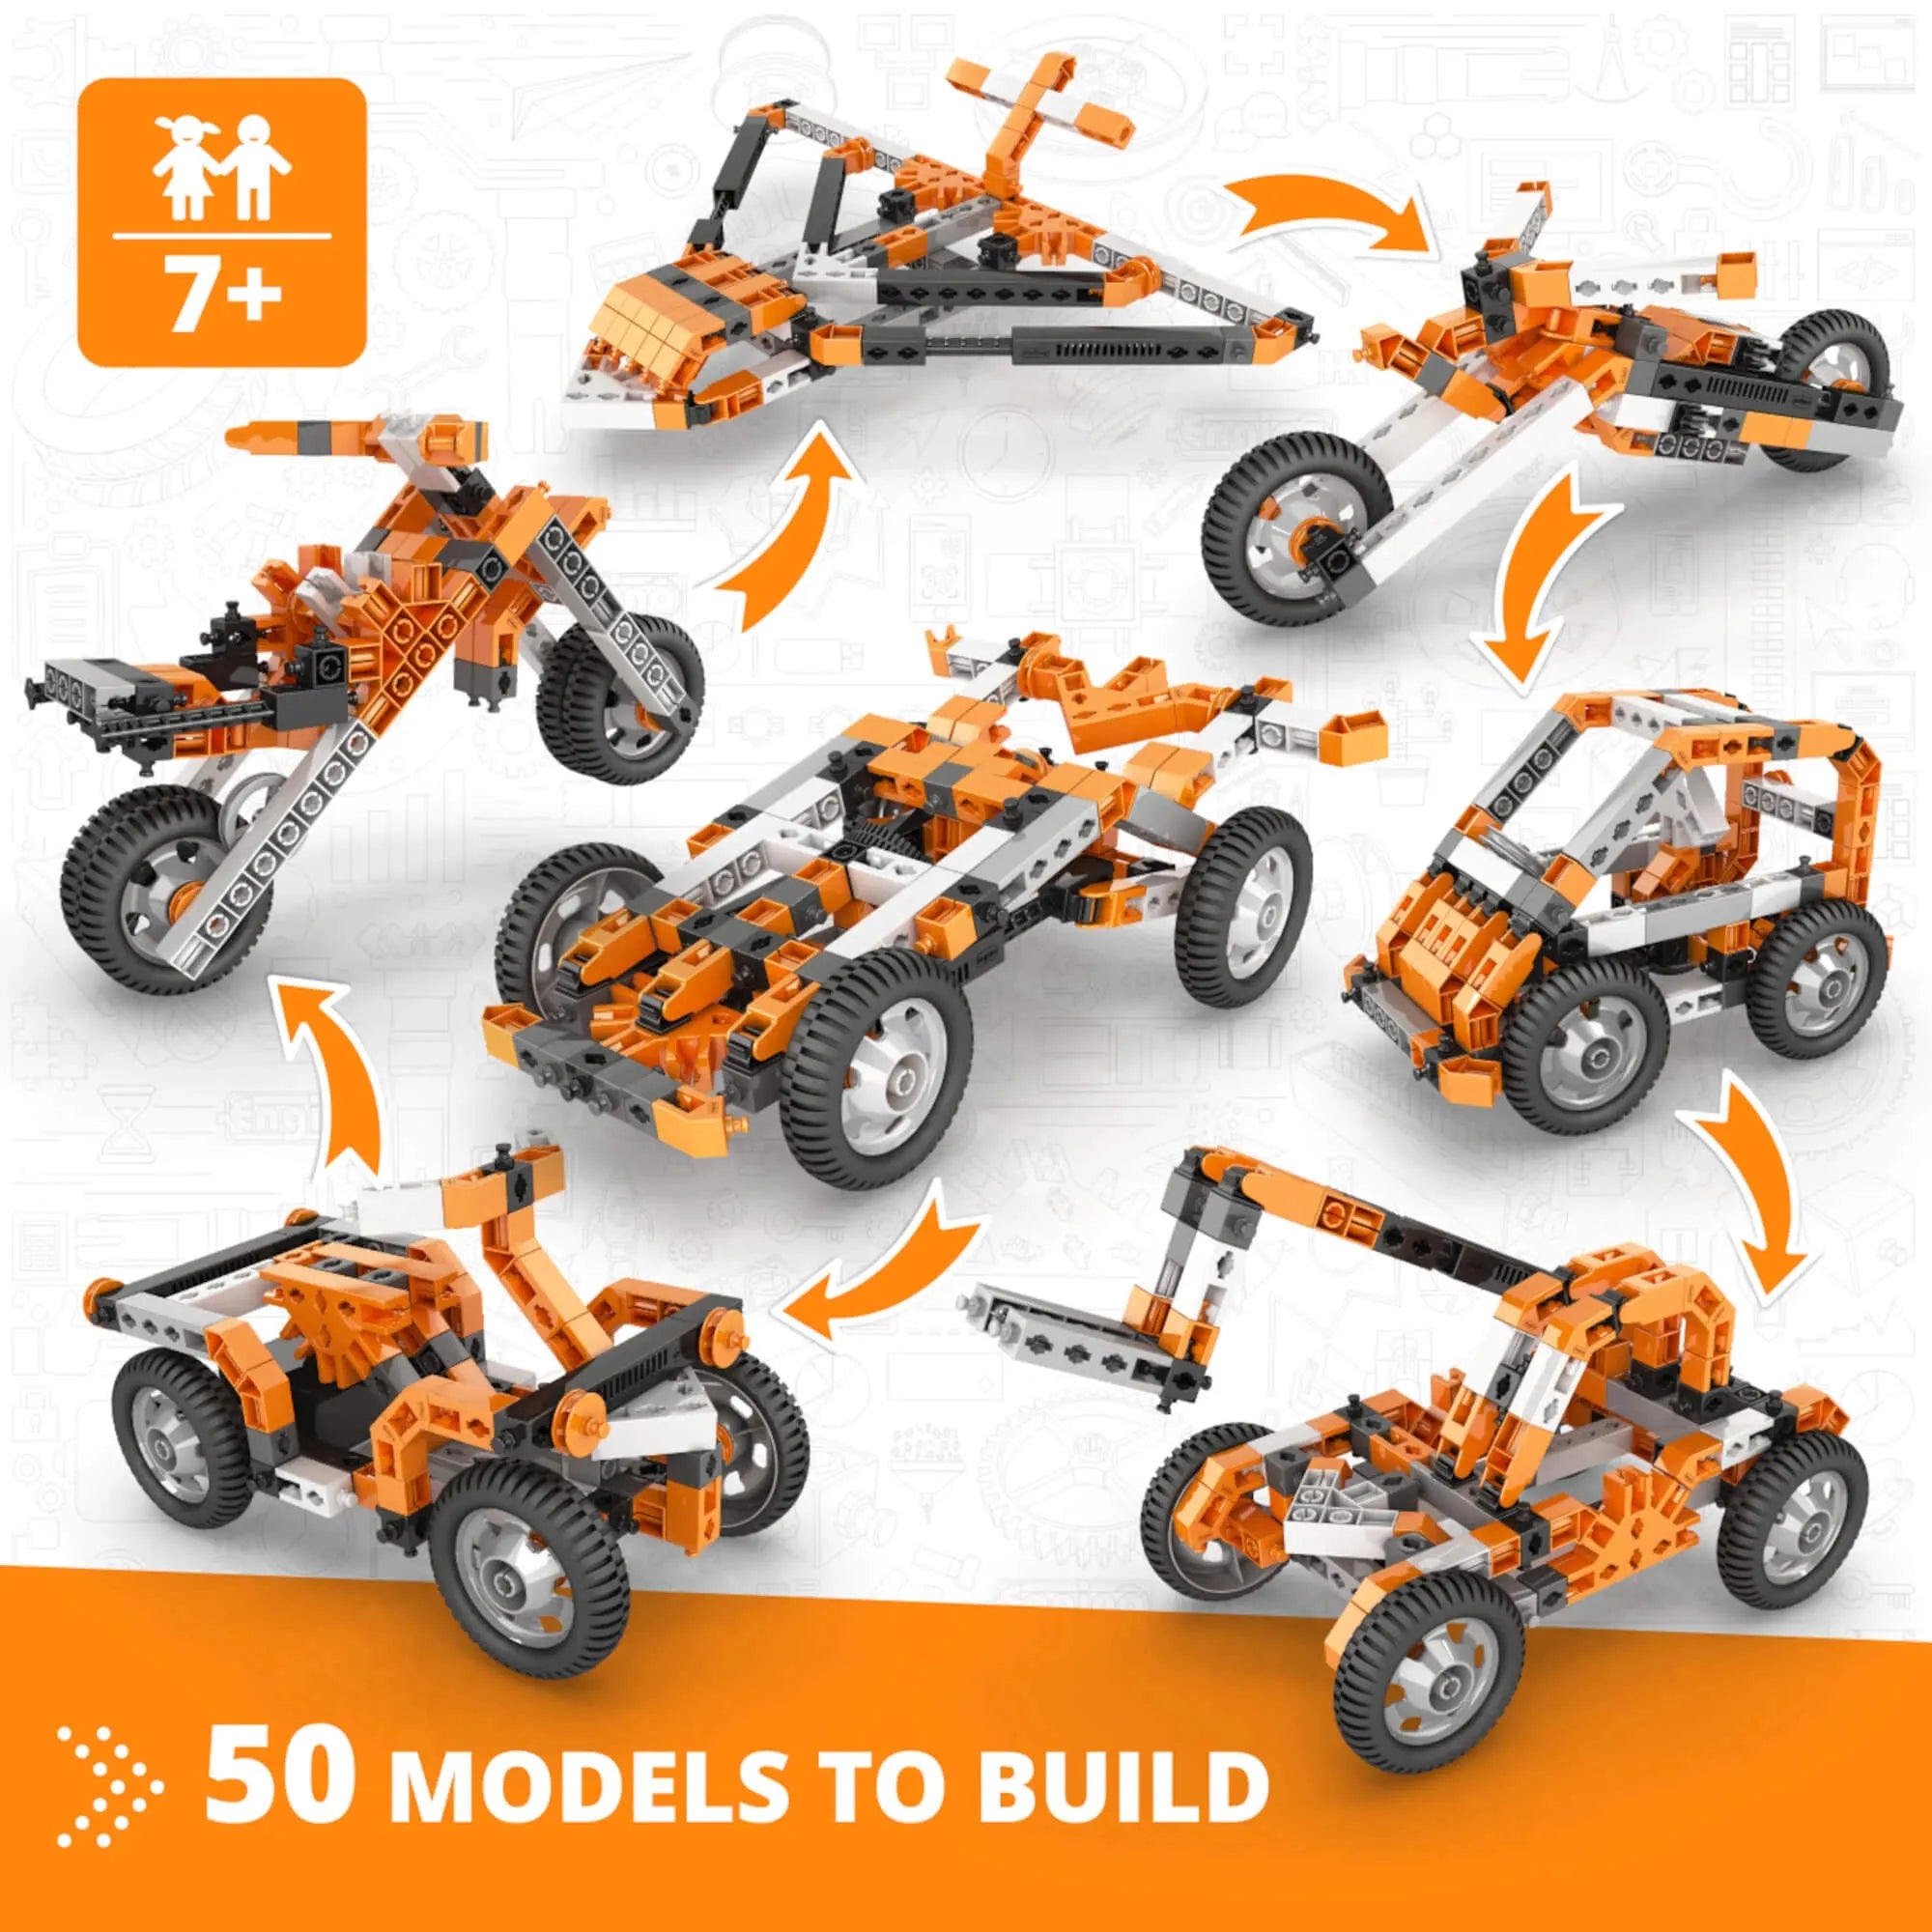 50 models to build with stem kit - shop 50-in-1 creative builder from Engino - STEM toys for children